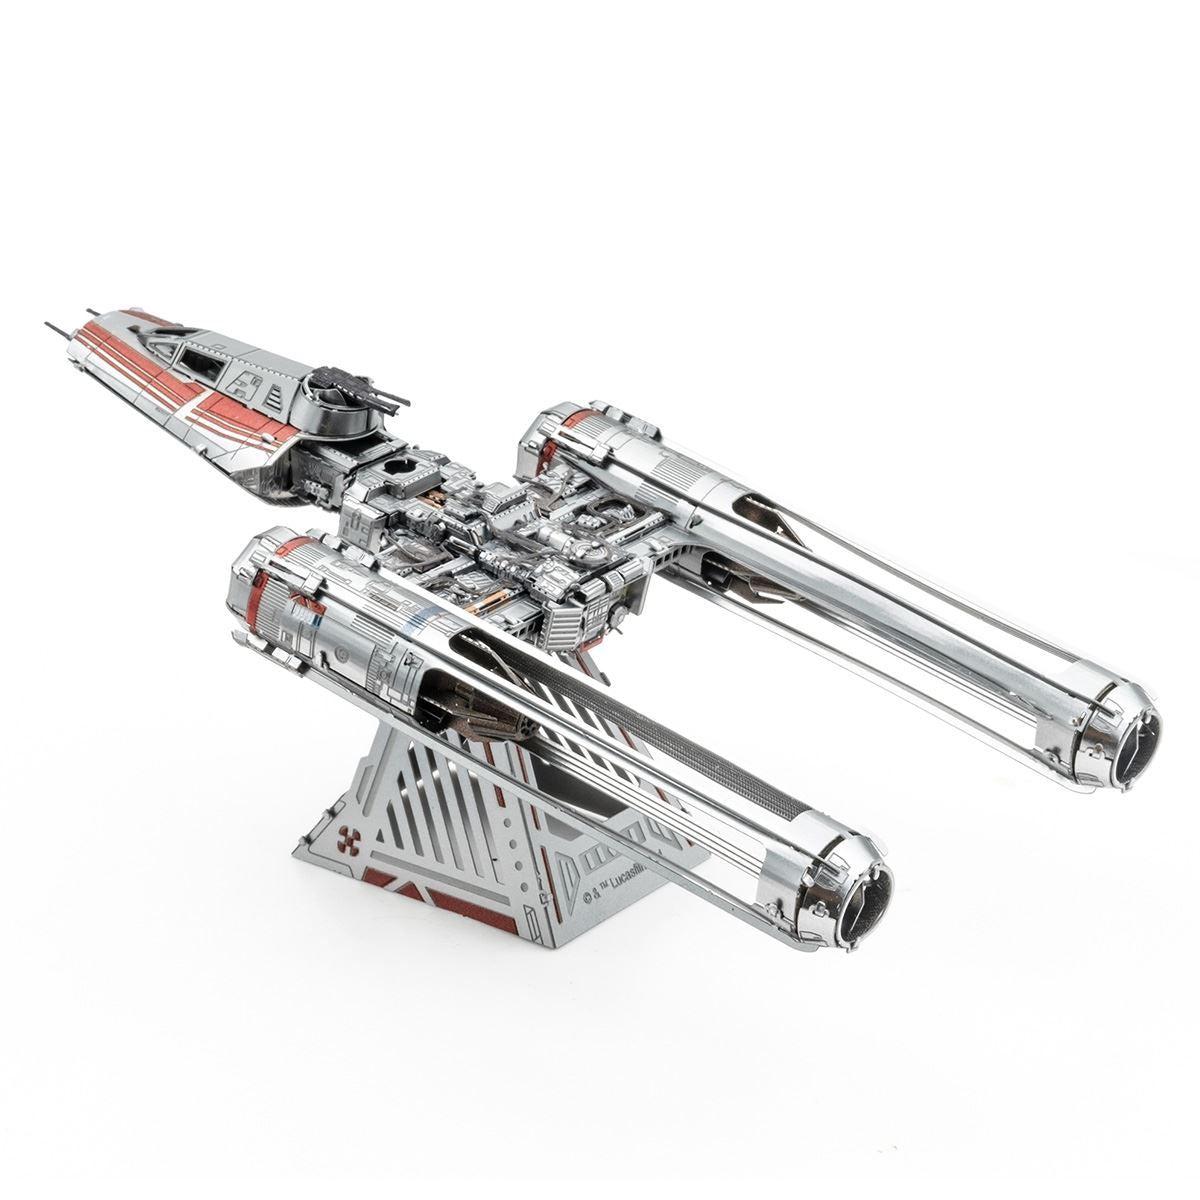 ZORII’S Y-WING FIGHTER™ - Steel 3D Model Kit - Metal Earth gift puzzle puzzle